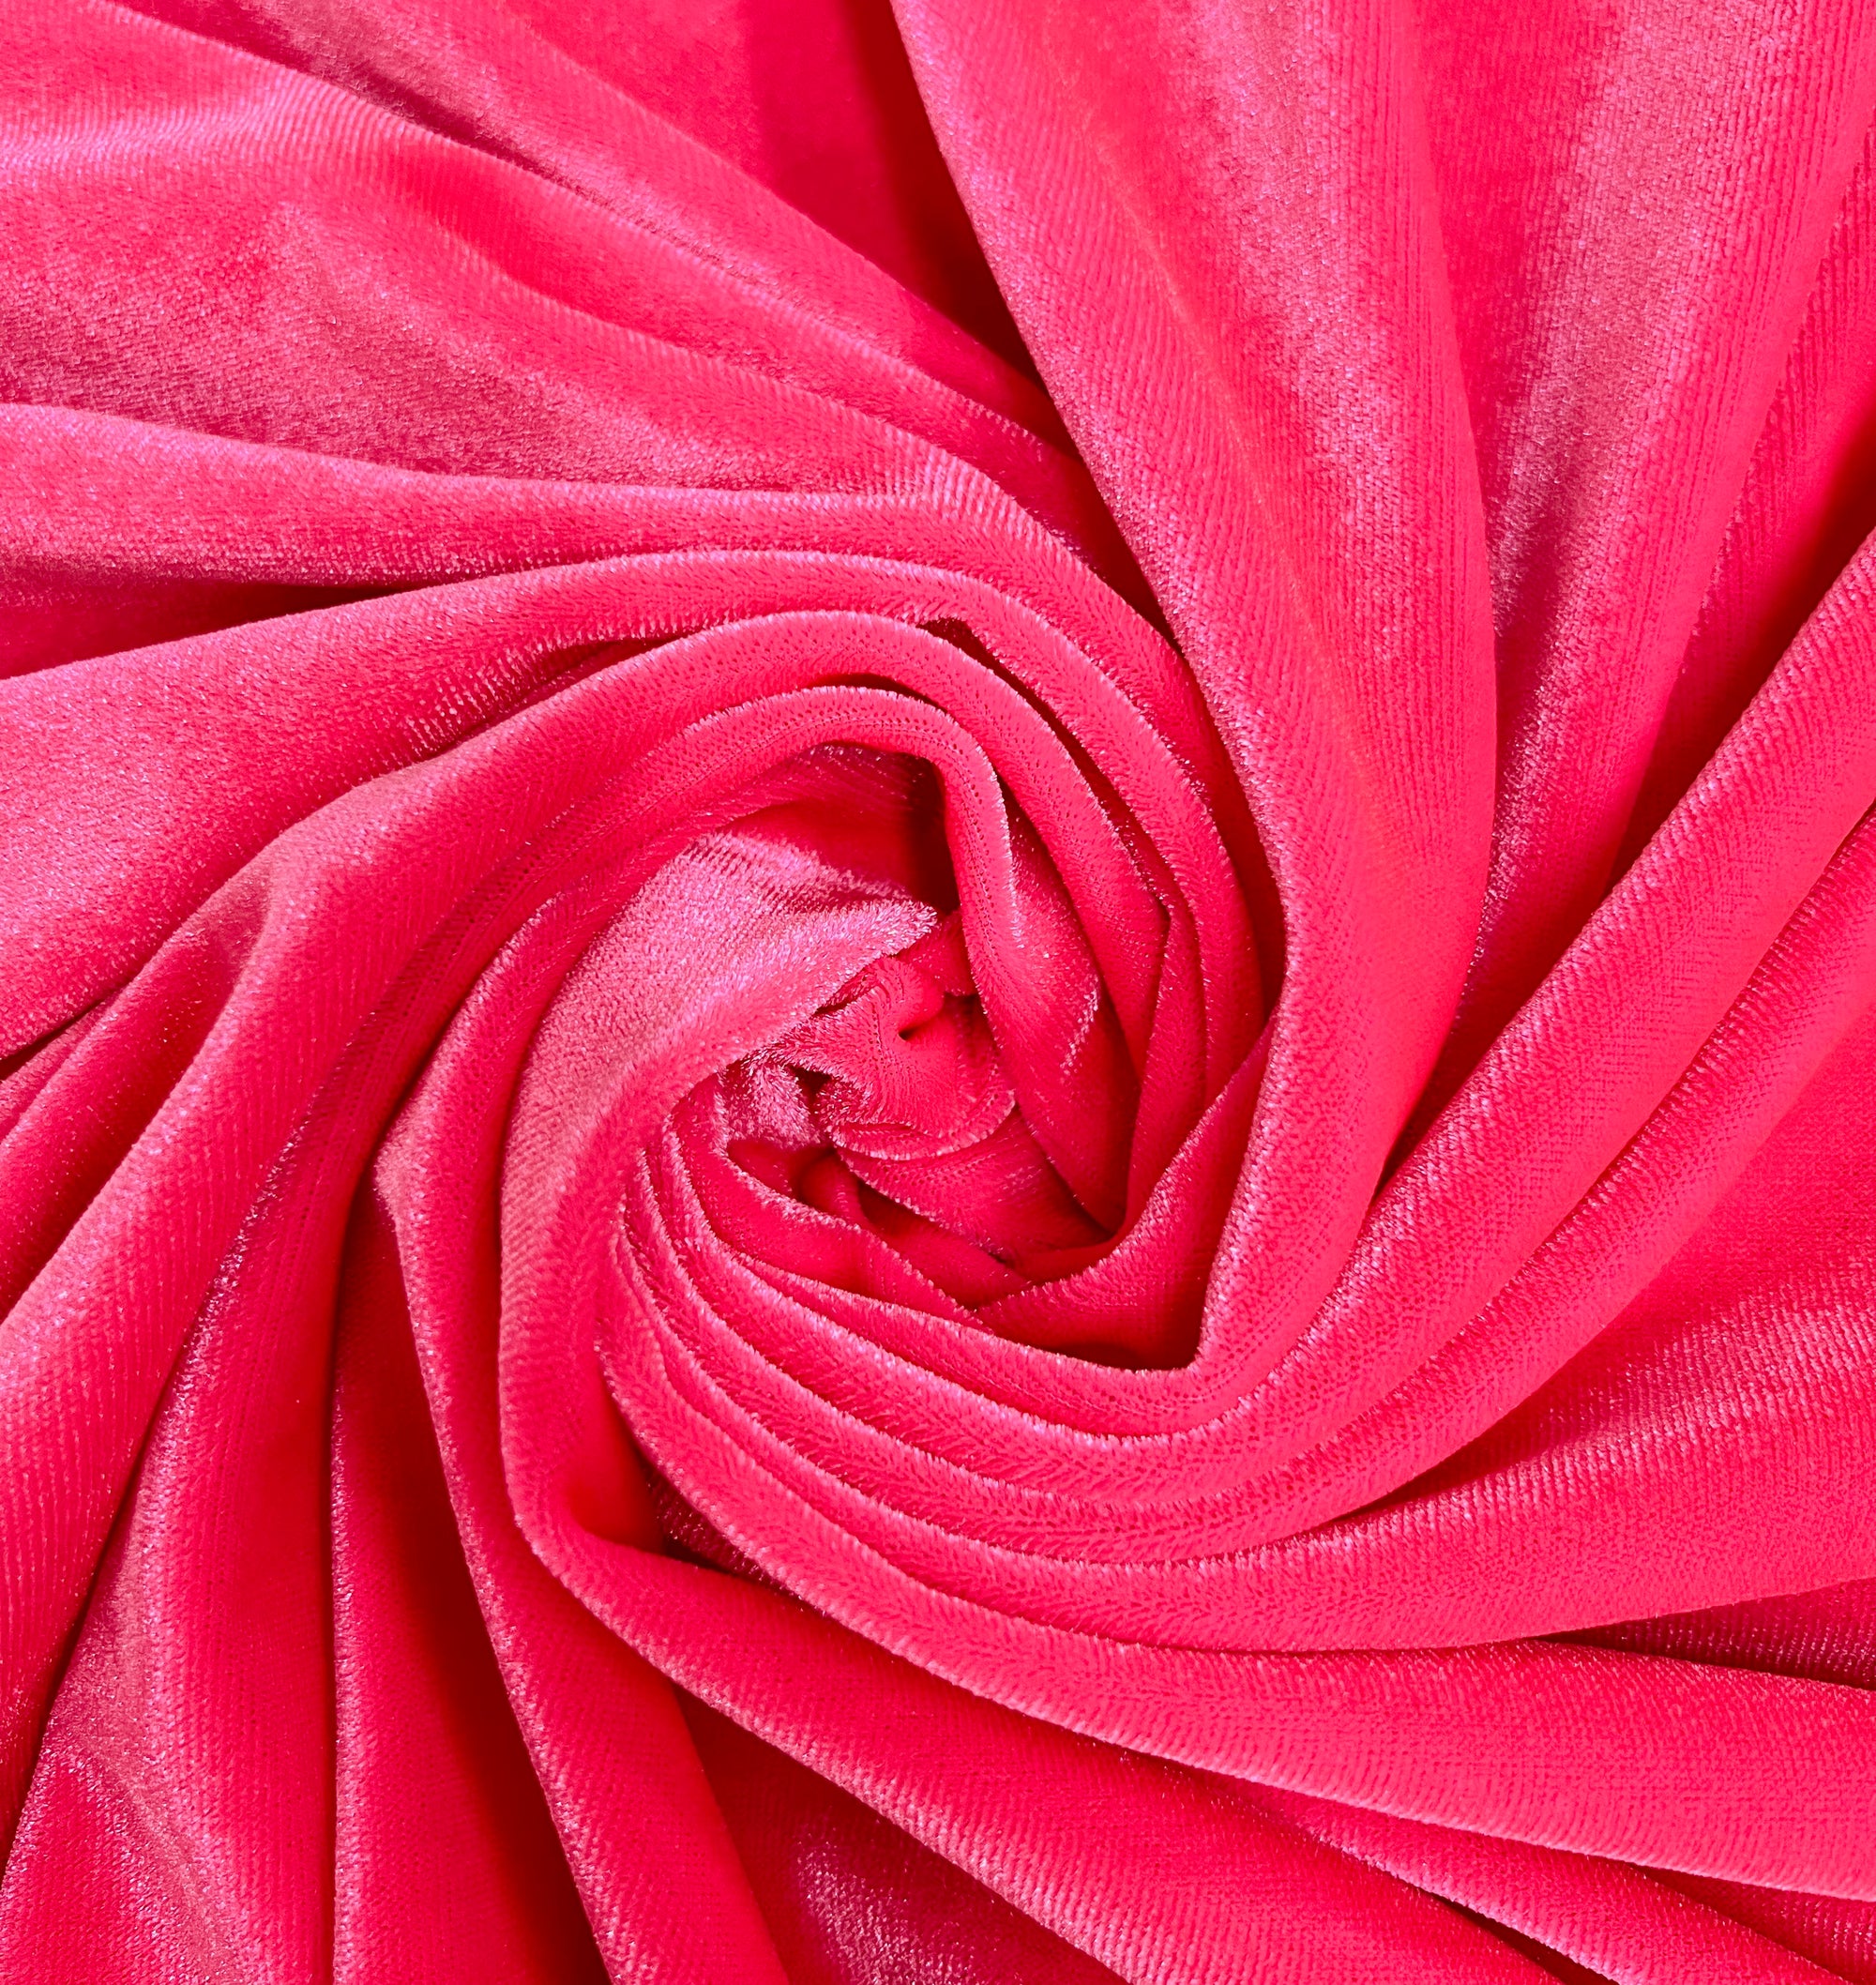 Princess NEON PINK Polyester Stretch Velvet Fabric for Bows, Top Knots, Head Wraps, Scrunchies, Clothes, Costumes, Crafts